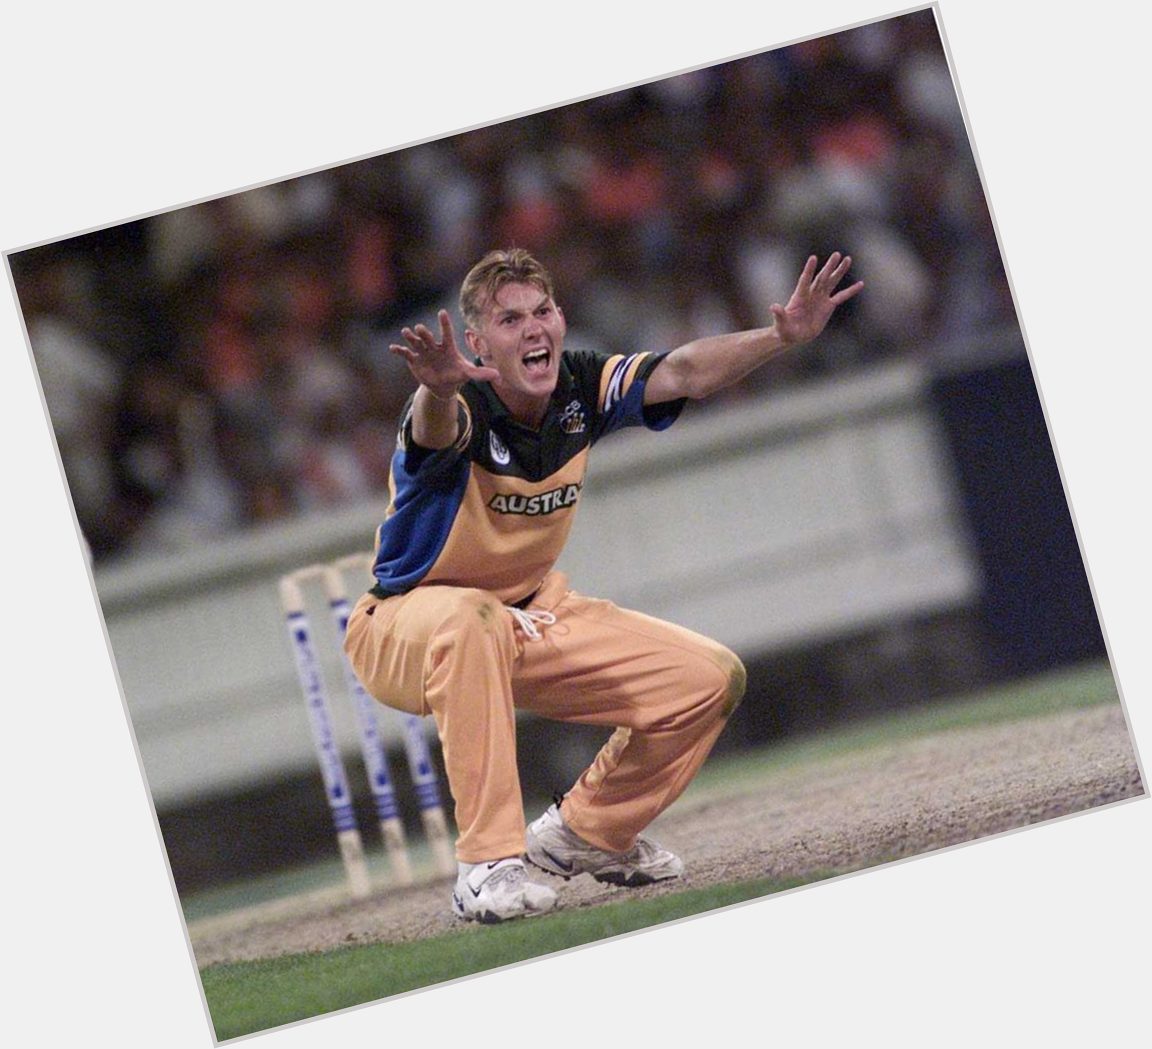 Happy birthday to one of the fastest bowlers the game has ever seen! Hope it was a good one, Brett Lee! 